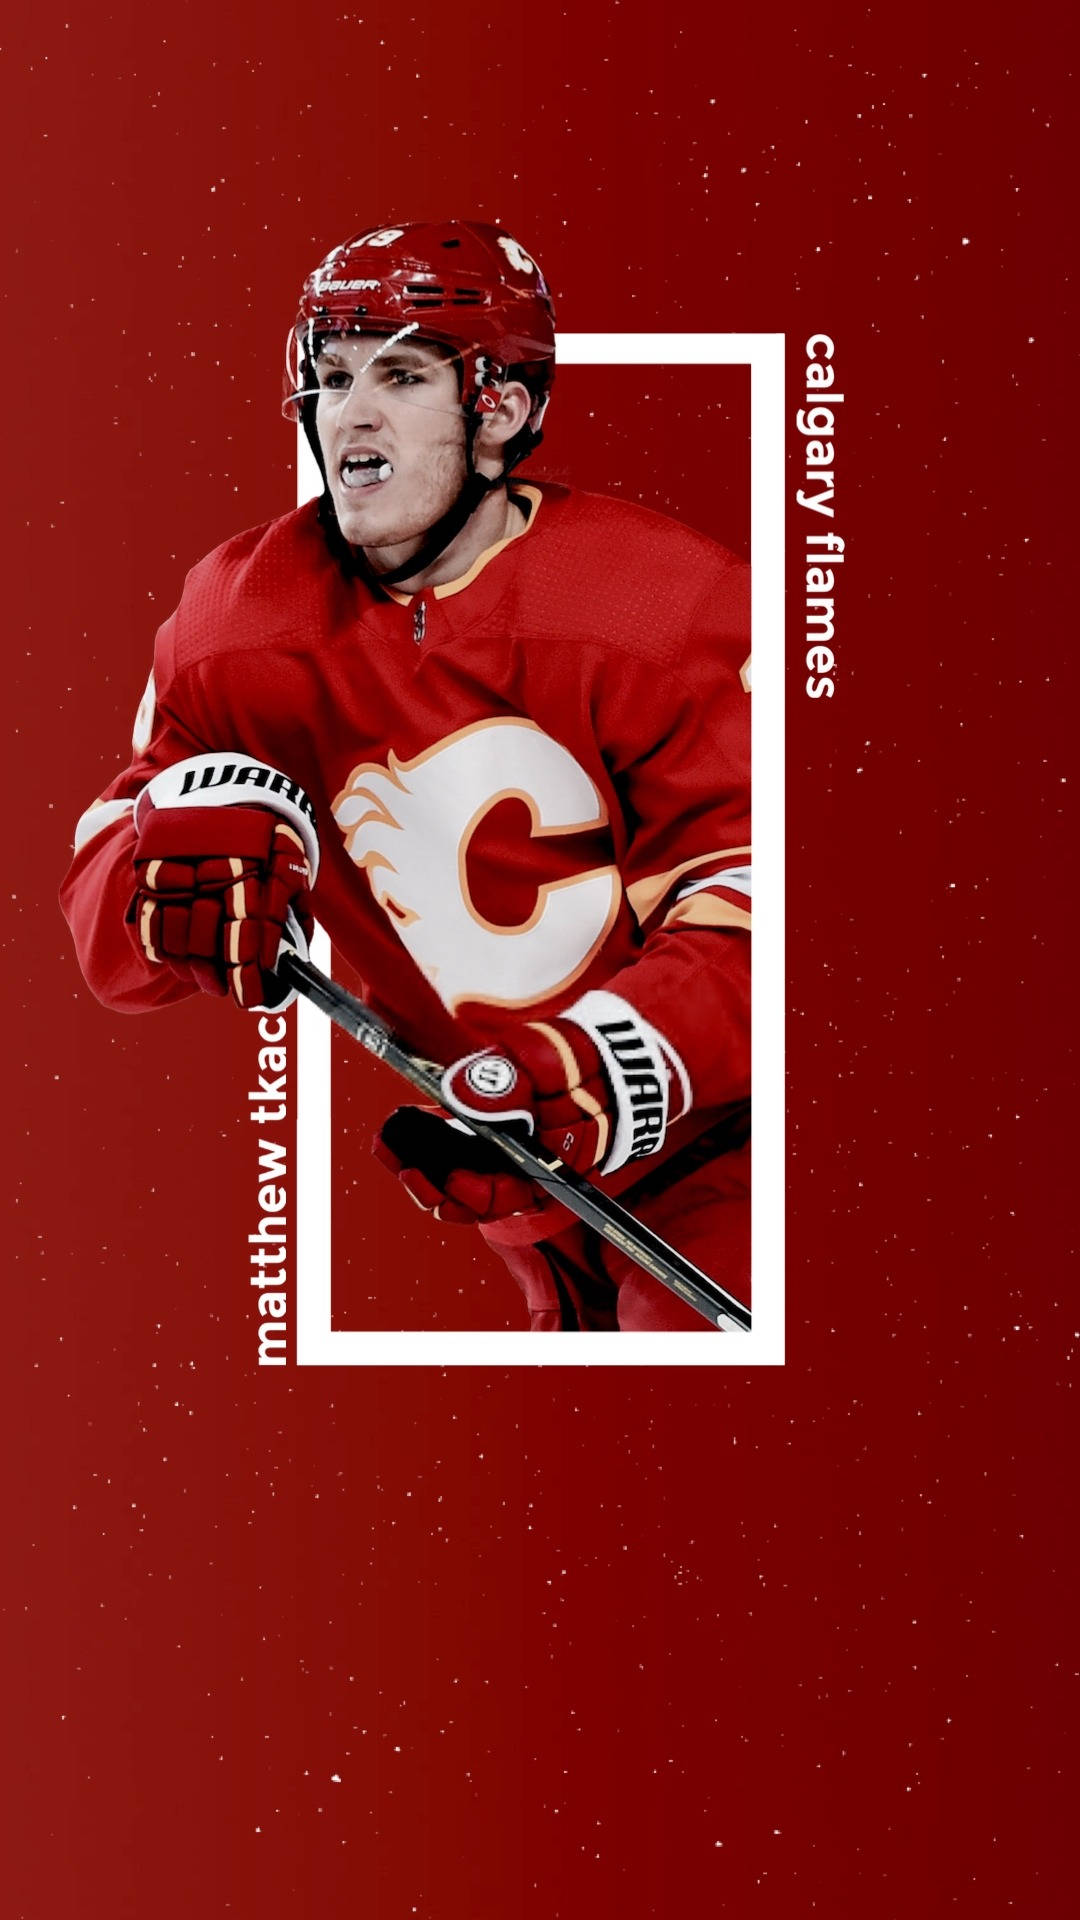 February Schedule Wallpaper Featuring the Beautiful Face & Flow of Matthew  Tkachuk (Alternate Coloured Versions in Comments) : r/CalgaryFlames